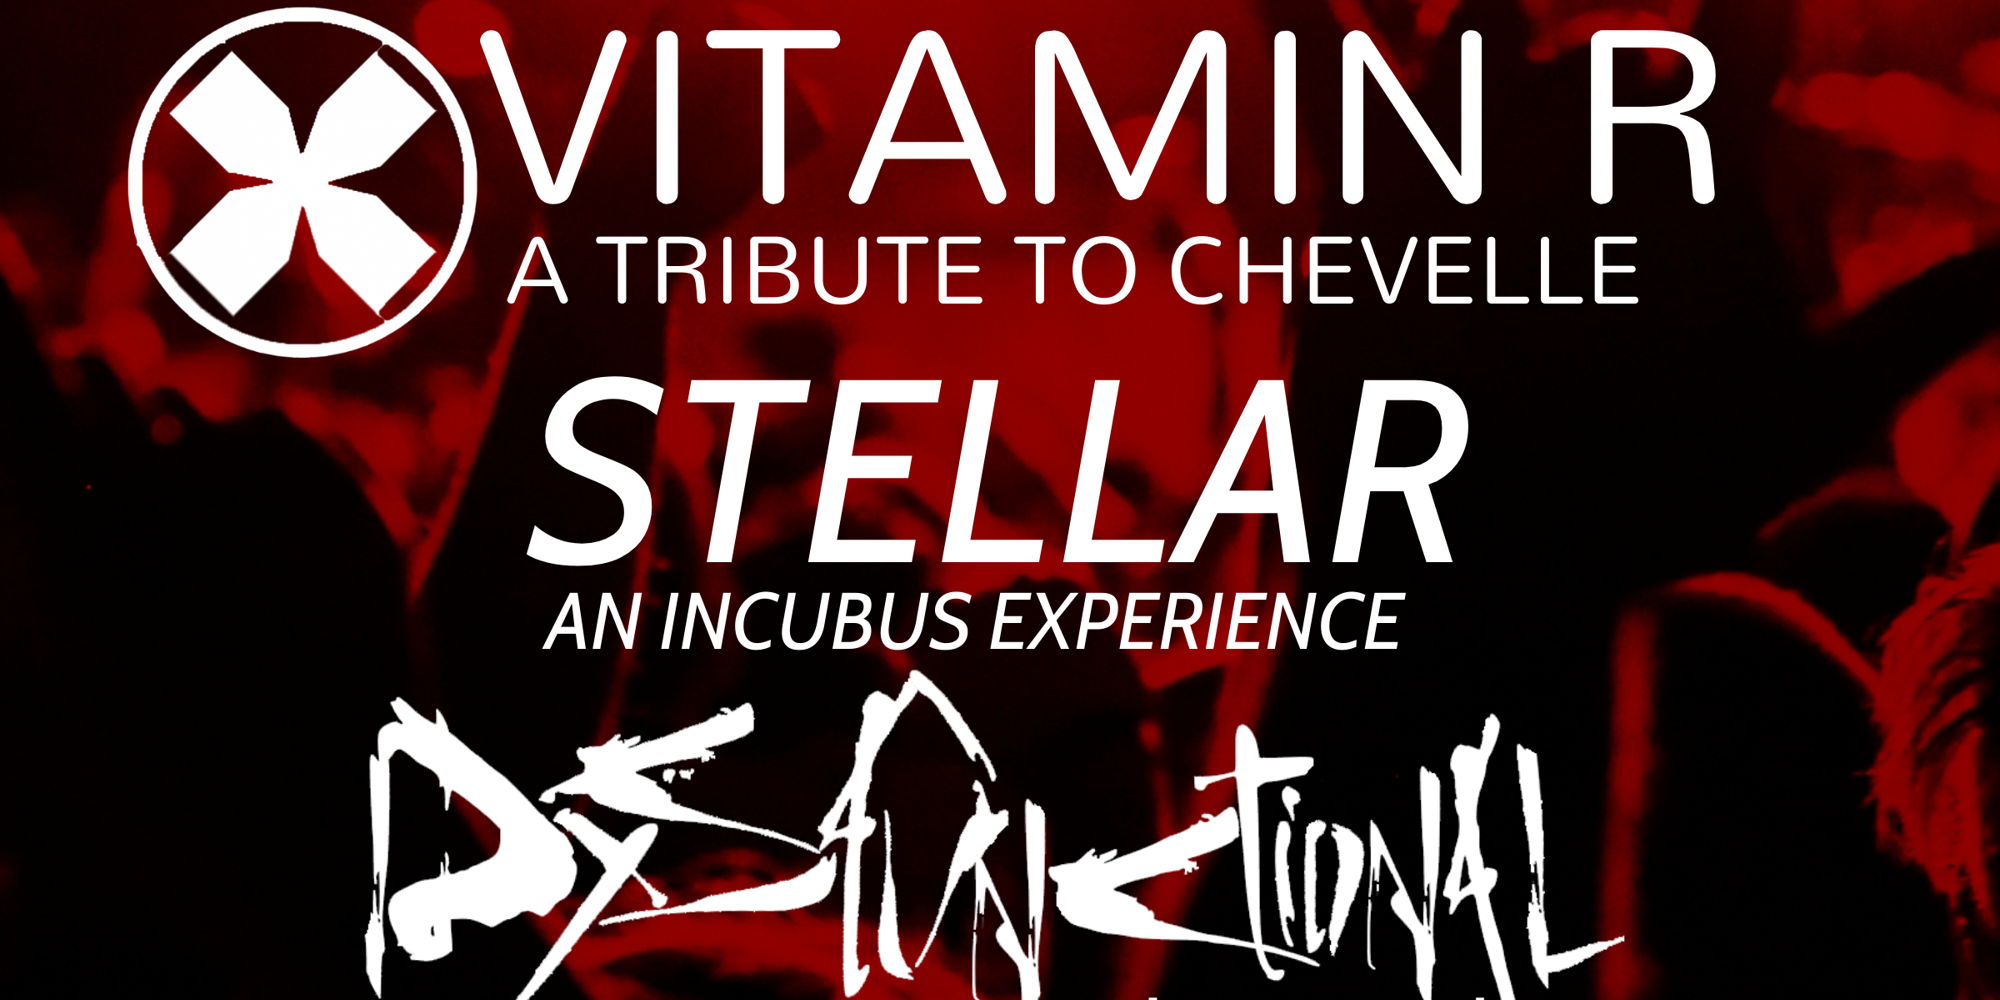 Chevelle, Staind and Incubus tributes! promotional image